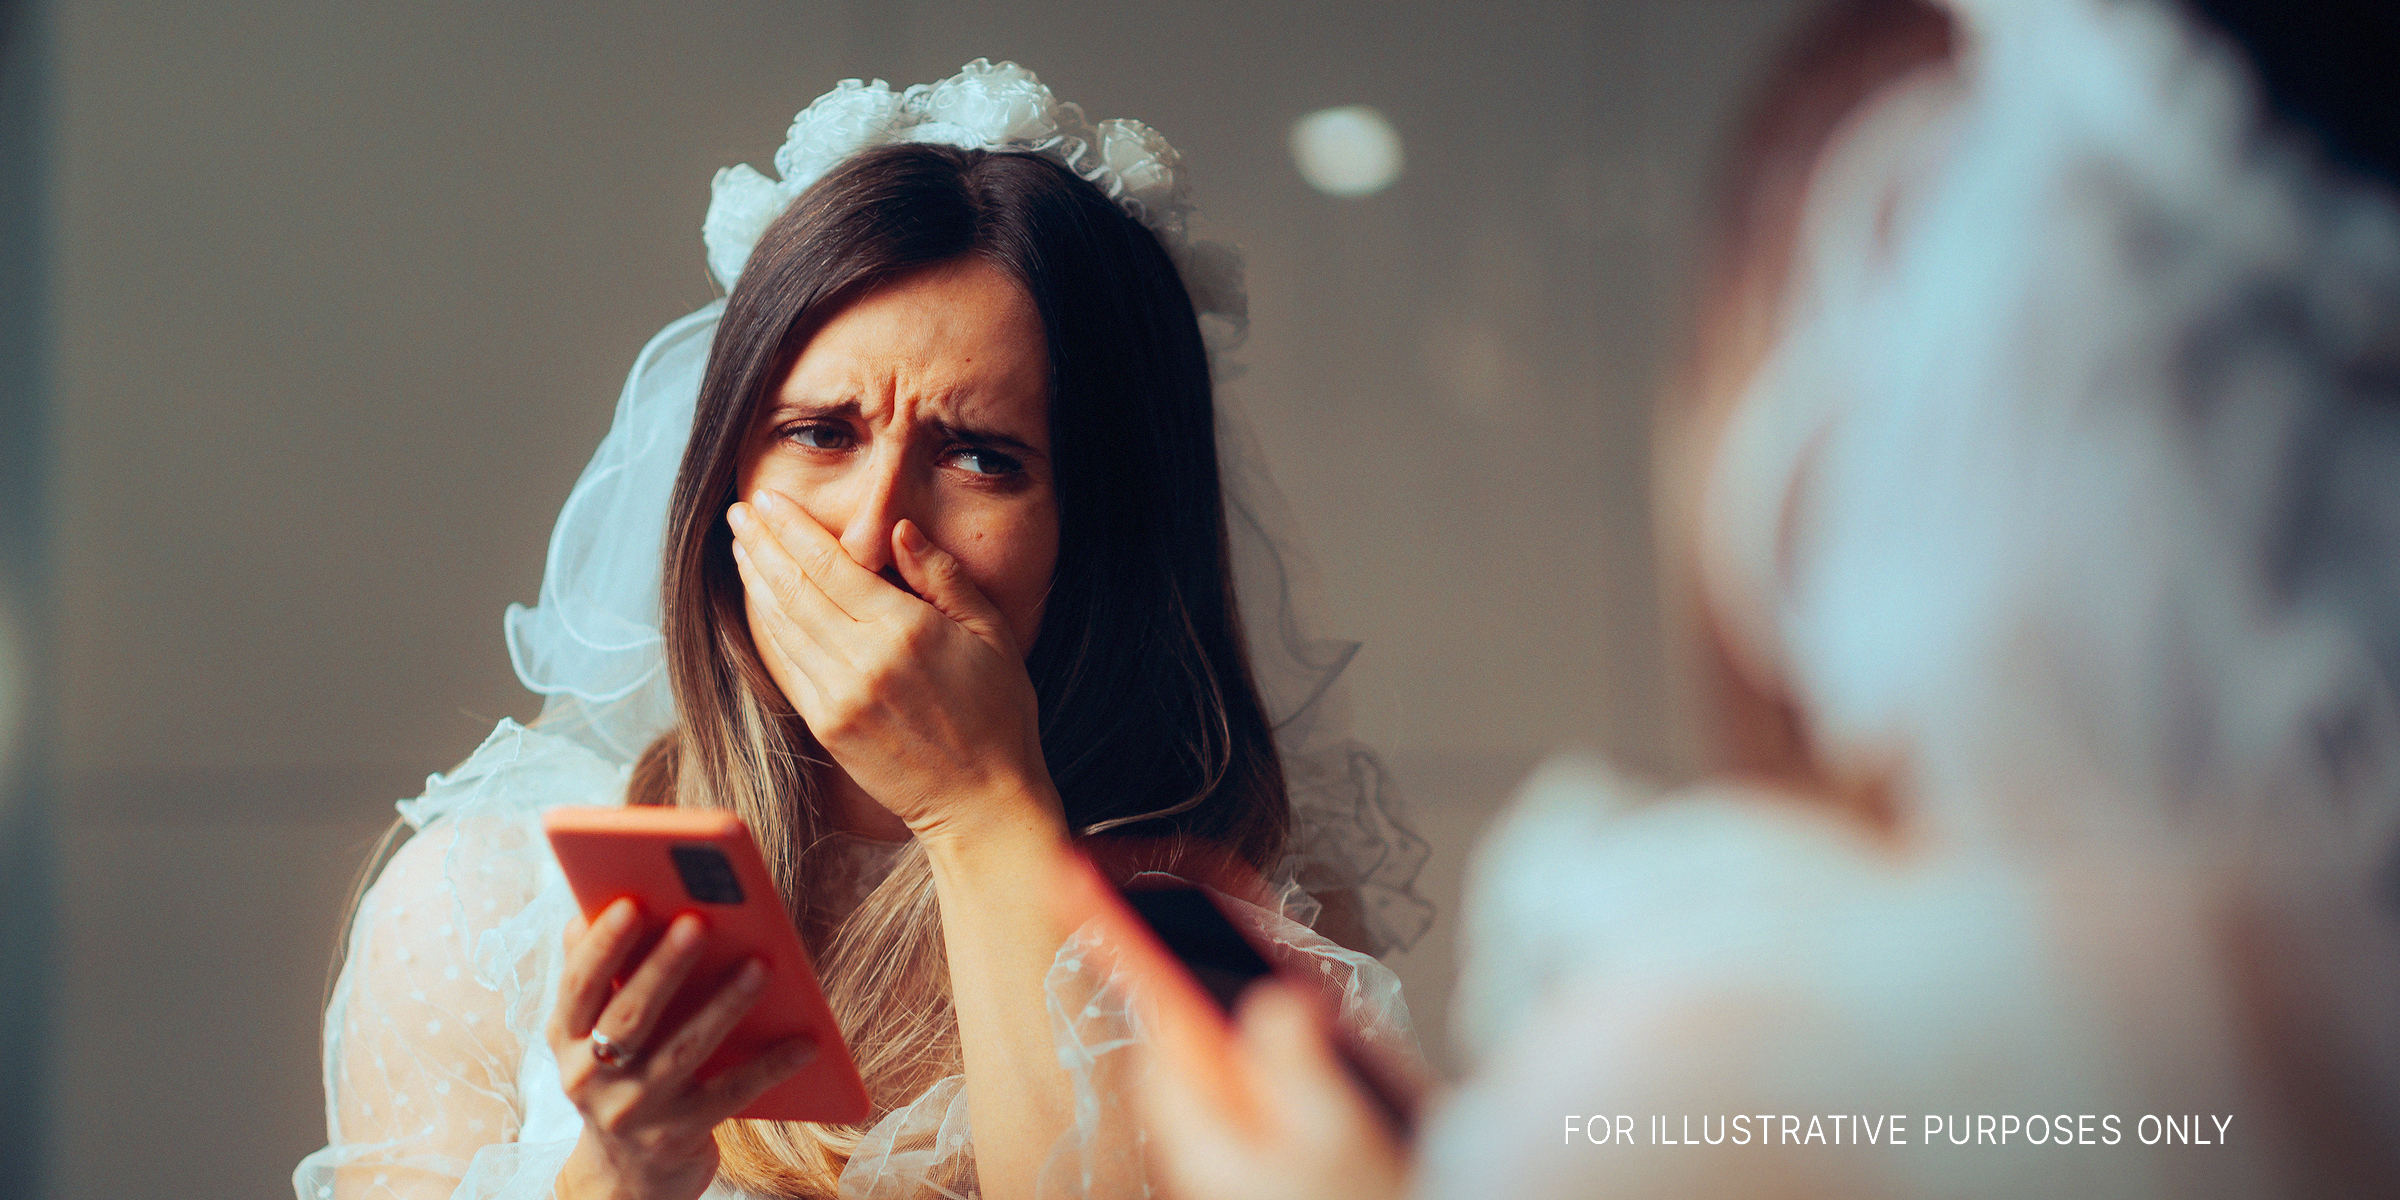 Shocked bride with a phone in her hand looking at herself in a mirror | Source: Getty Images